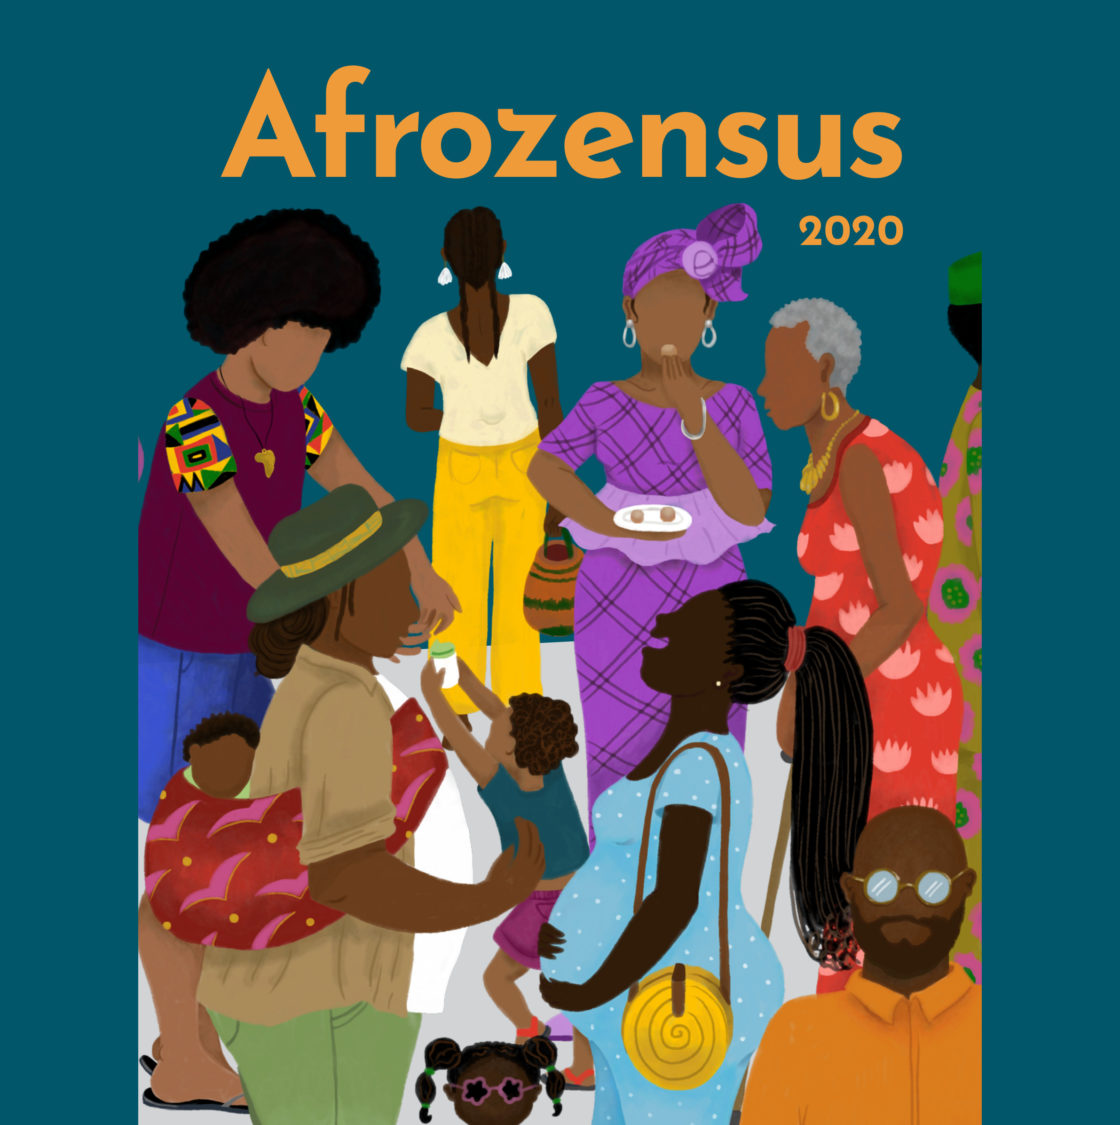 deep green background with orange letter "Afroizensus 2020" with illustration of some Black people with colouful clothsings from baybe to old person. Hélène Baum-Owoyele